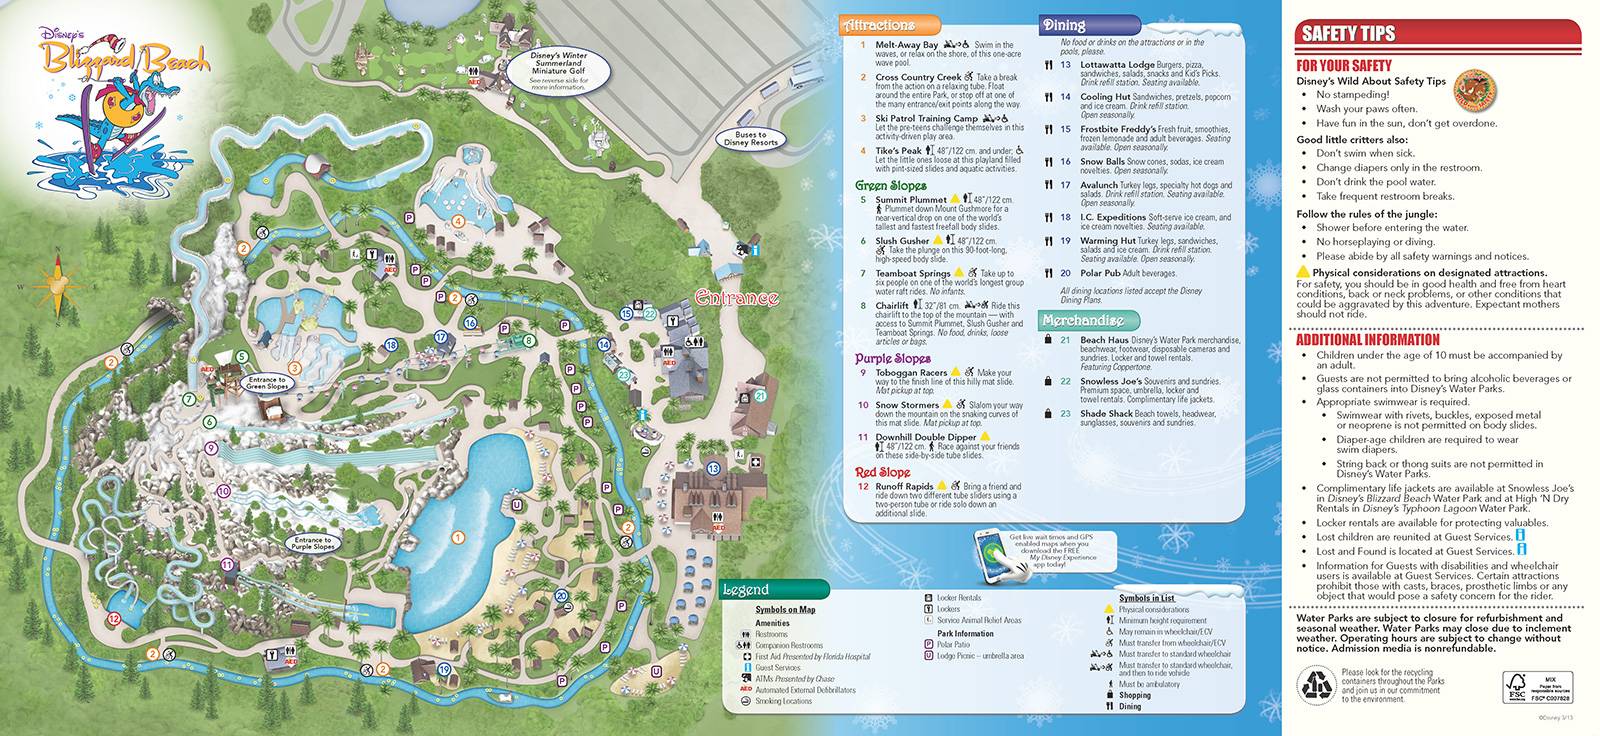 New 2013 Park Maps and Times Guides